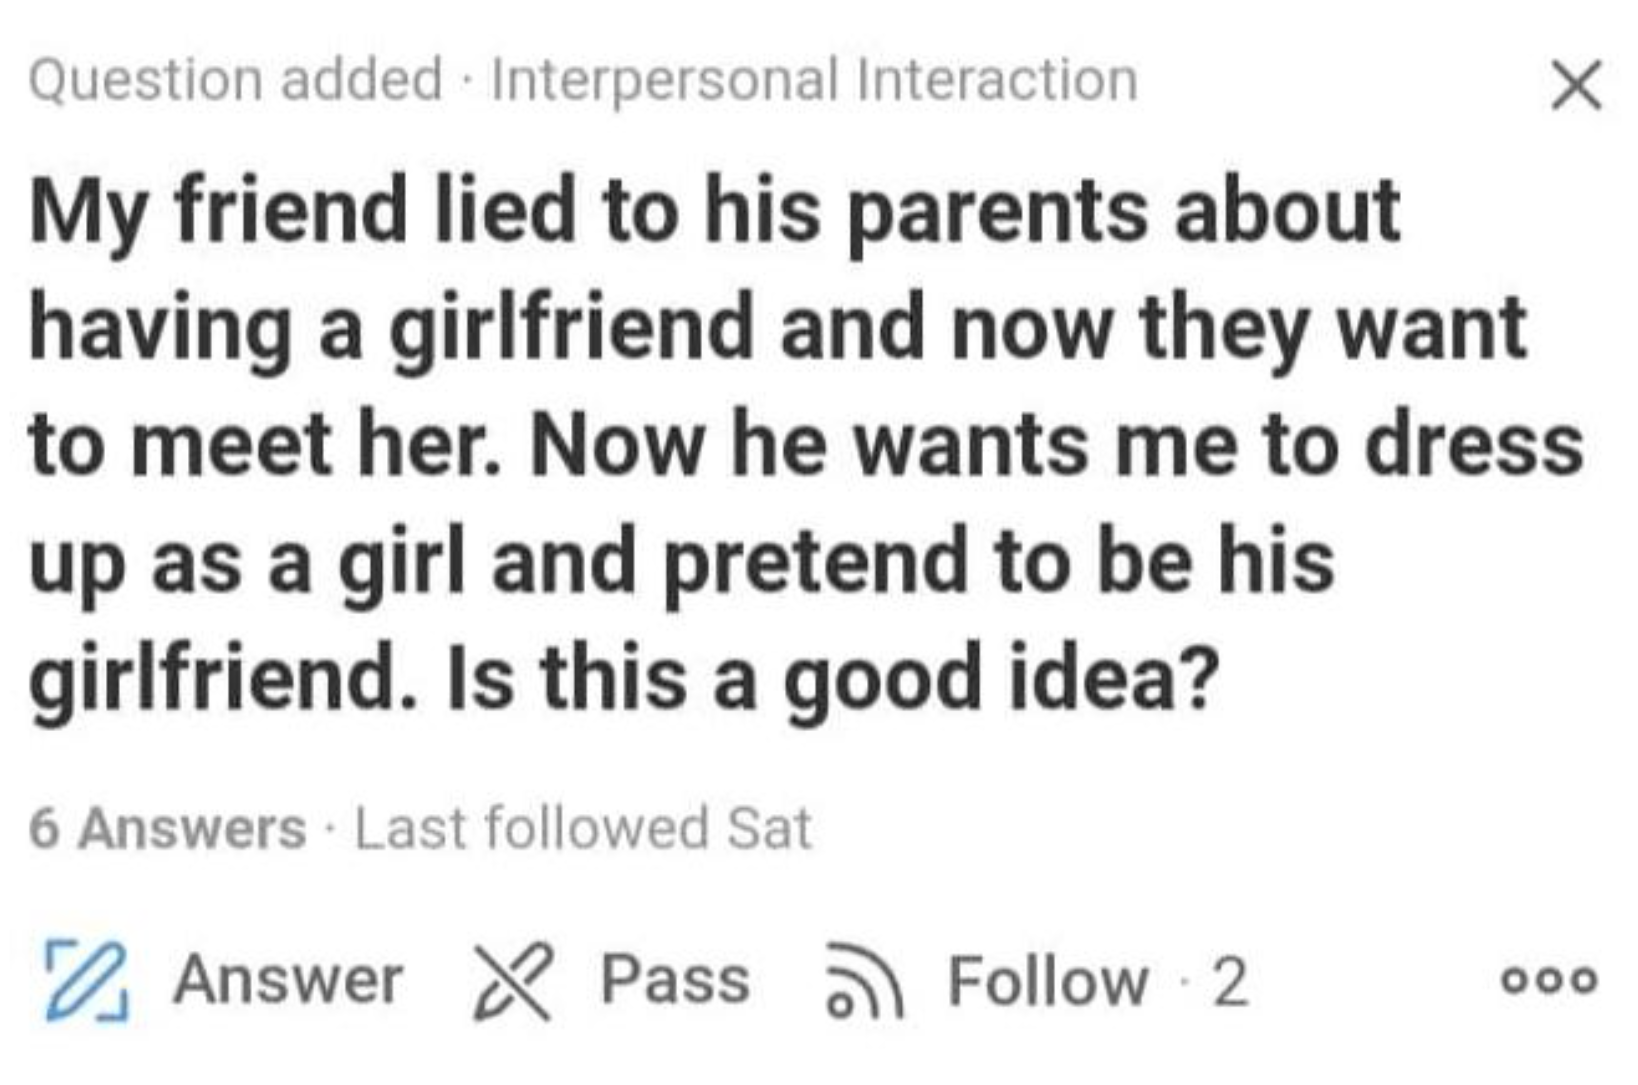 wild quora questions - Question added. Interpersonal Interaction My friend lied to his parents about having a girlfriend and now they want to meet her. Now he wants me to dress up as a girl and pretend to be his girlfriend. Is this a good idea? 6 Answers 